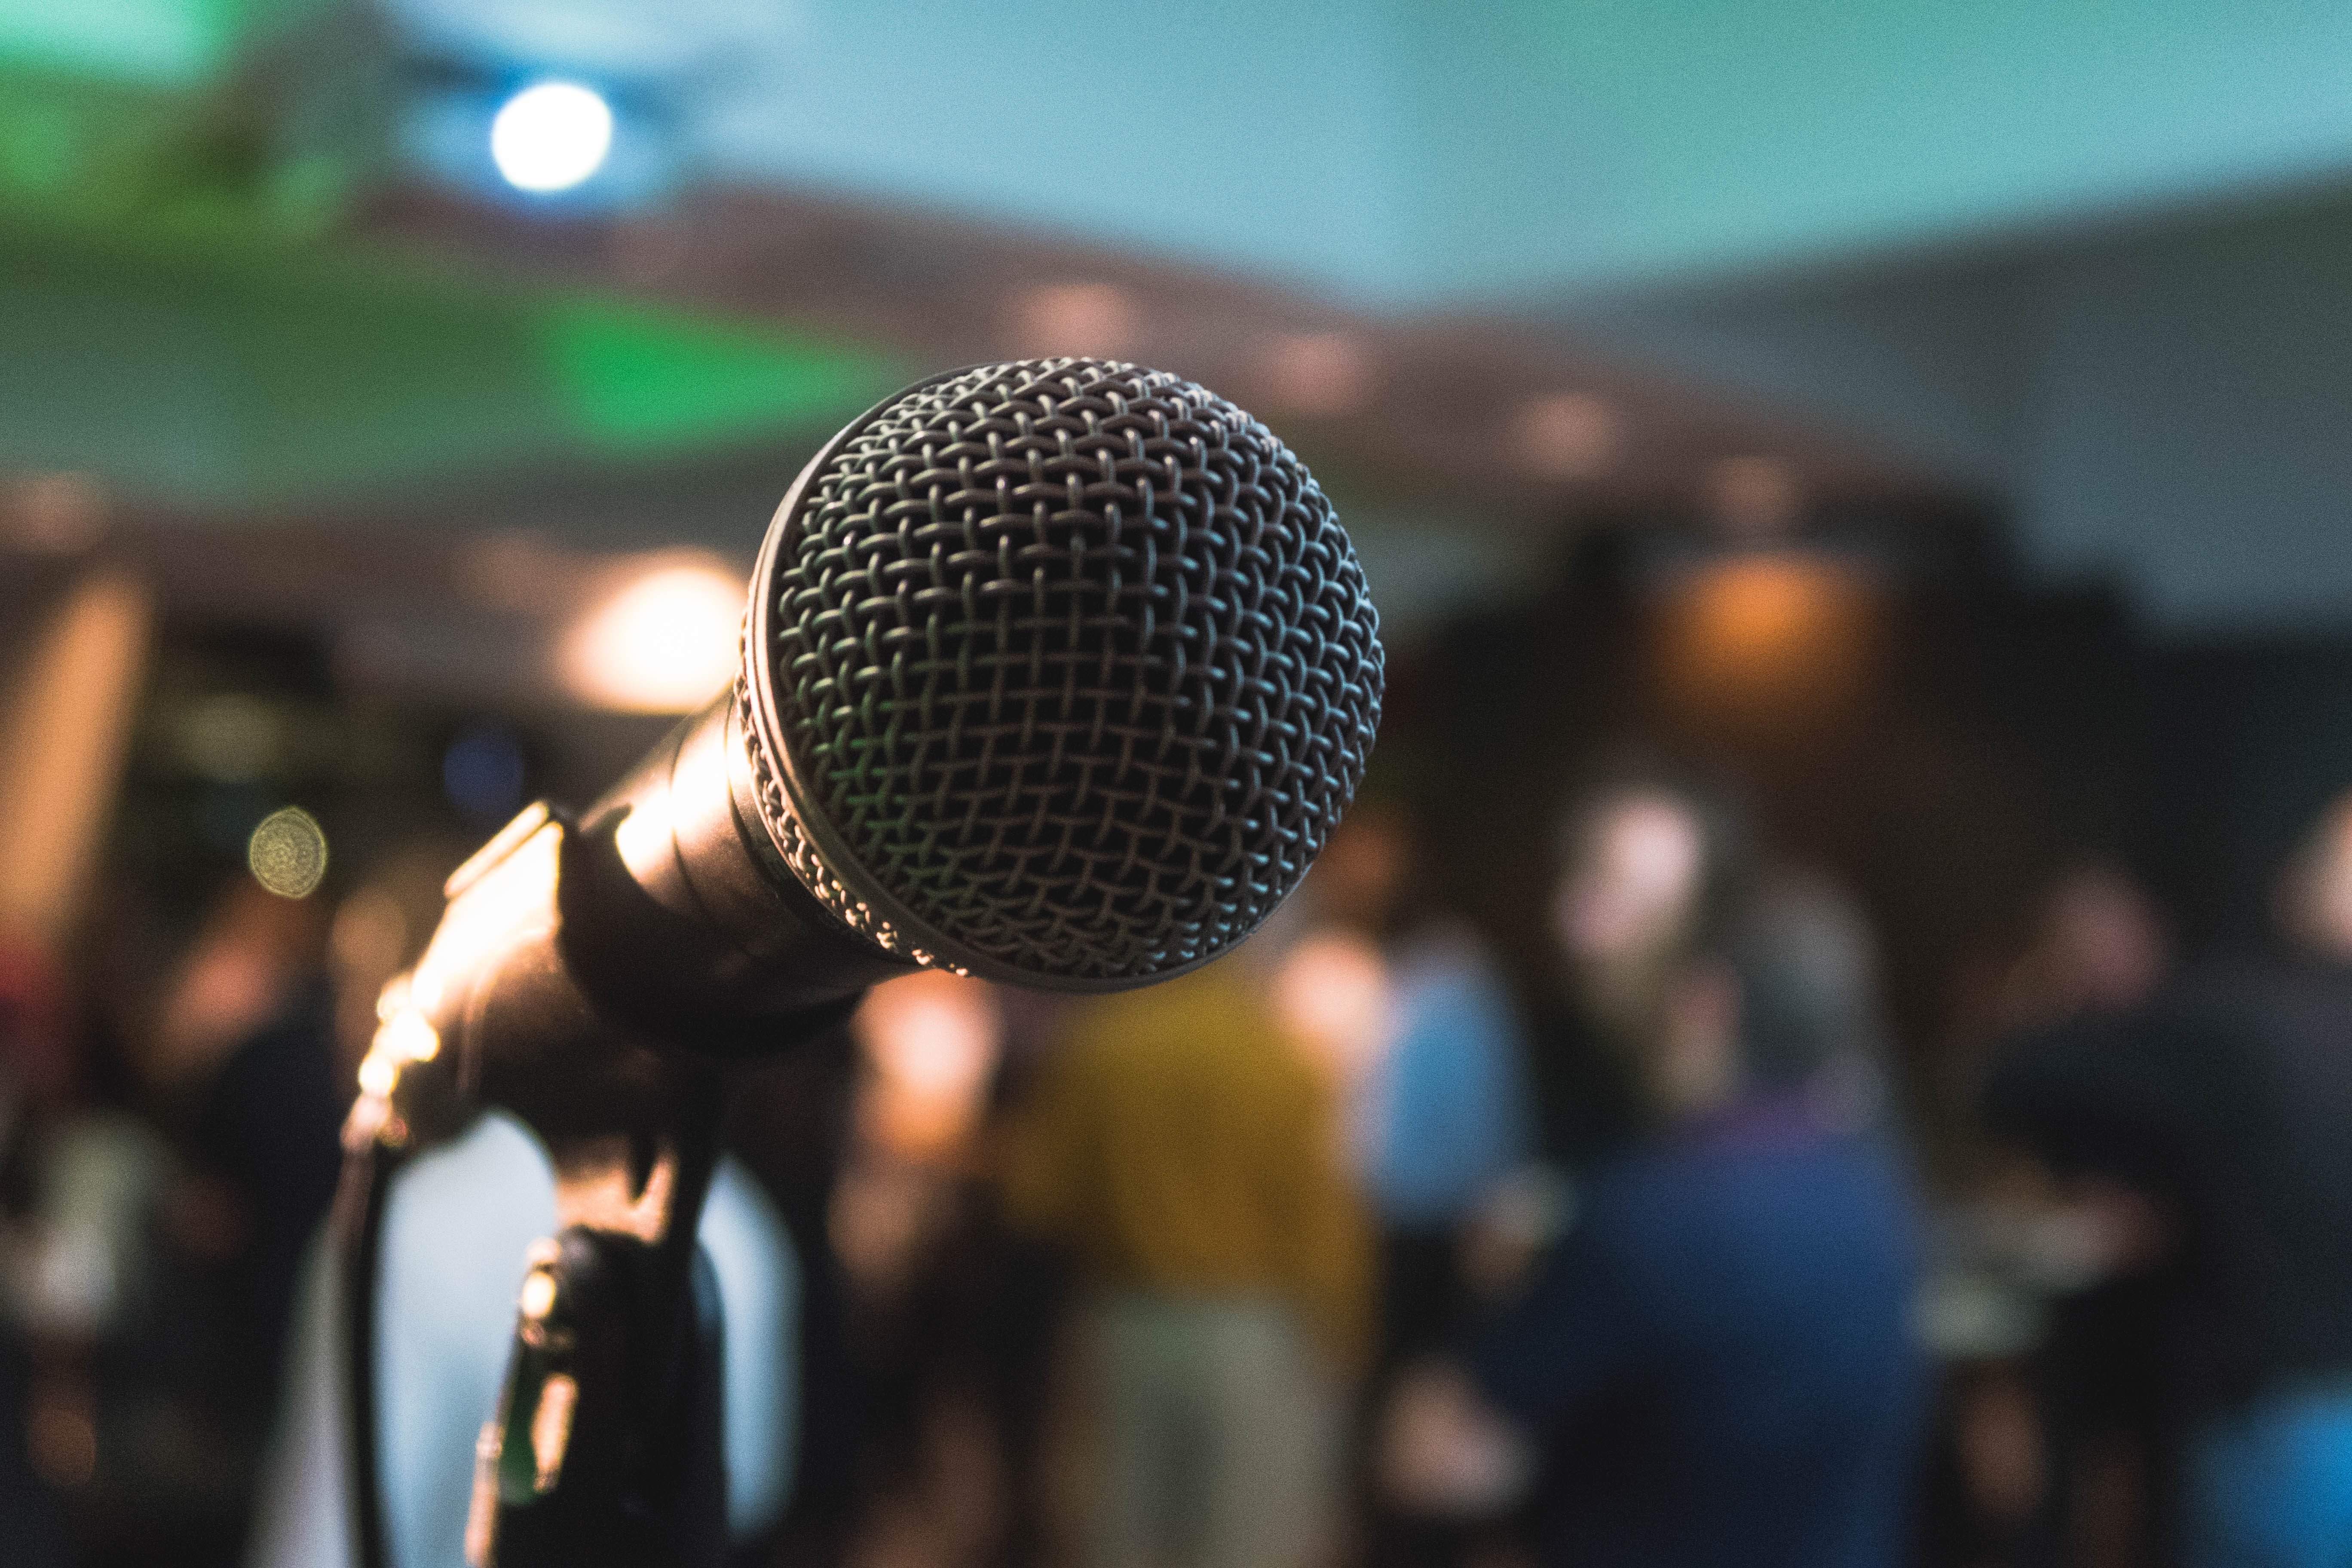 A close-up shot of a microphone on a stage in front of a blurry crowd